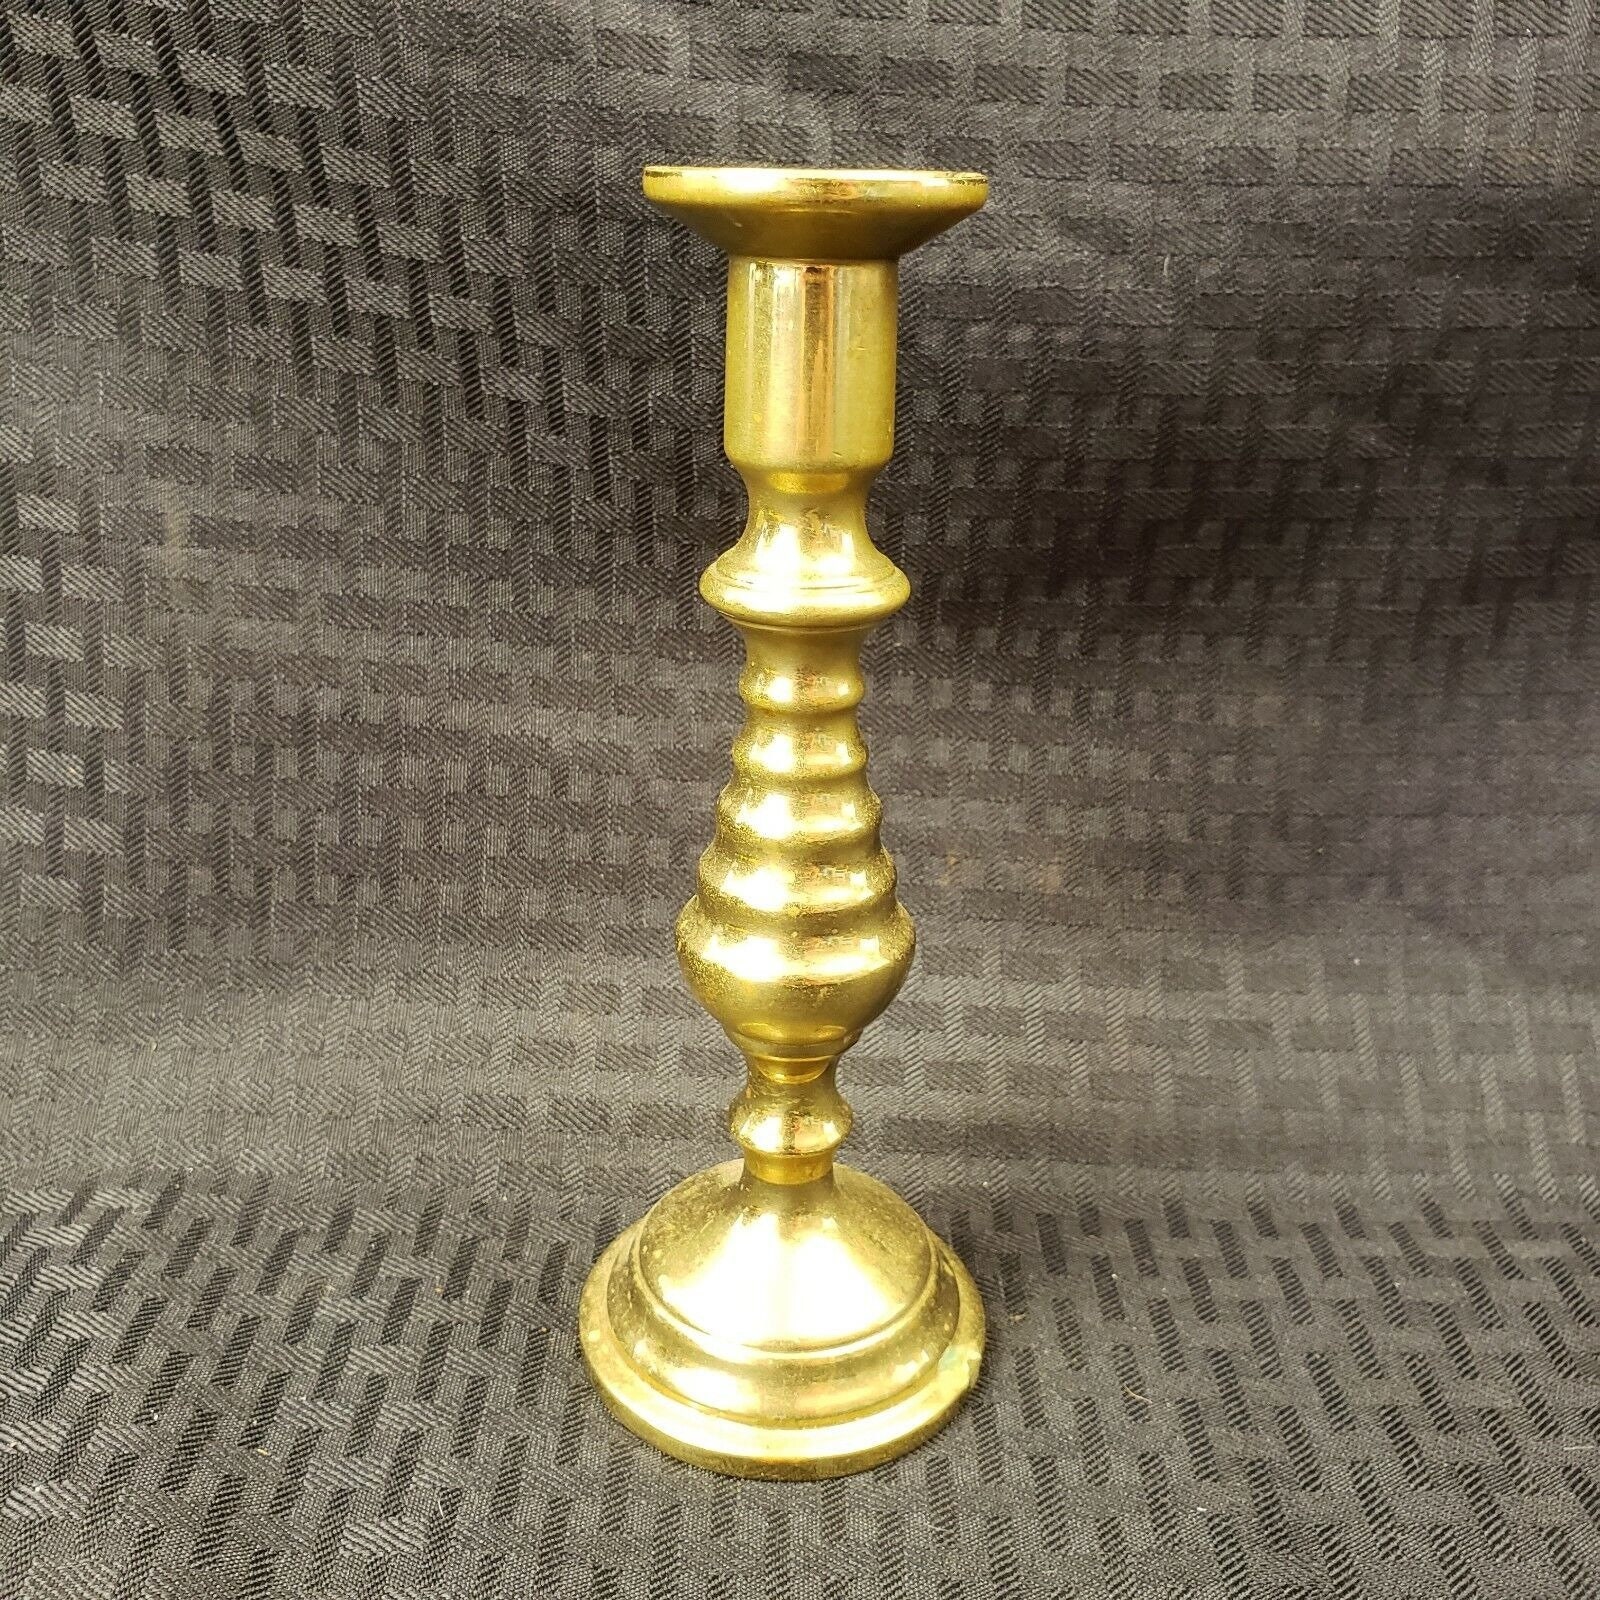 English Brass Candlestick With Push up Rods , Antique 19th Century  Victorian Brass Beehive Candlestick Holders 